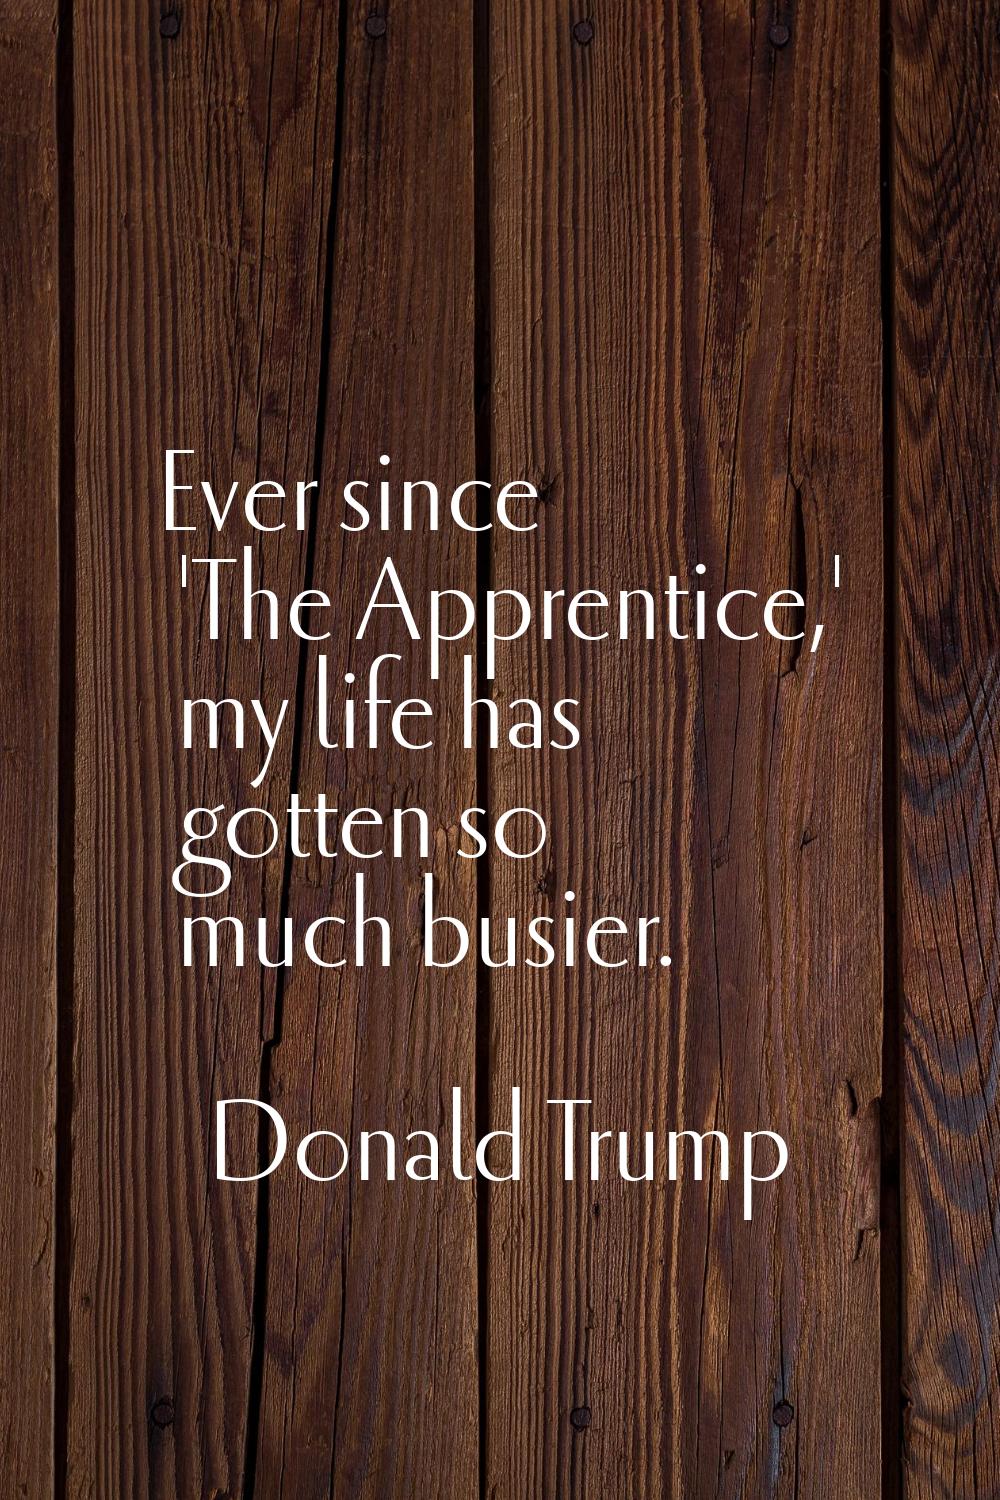 Ever since 'The Apprentice,' my life has gotten so much busier.